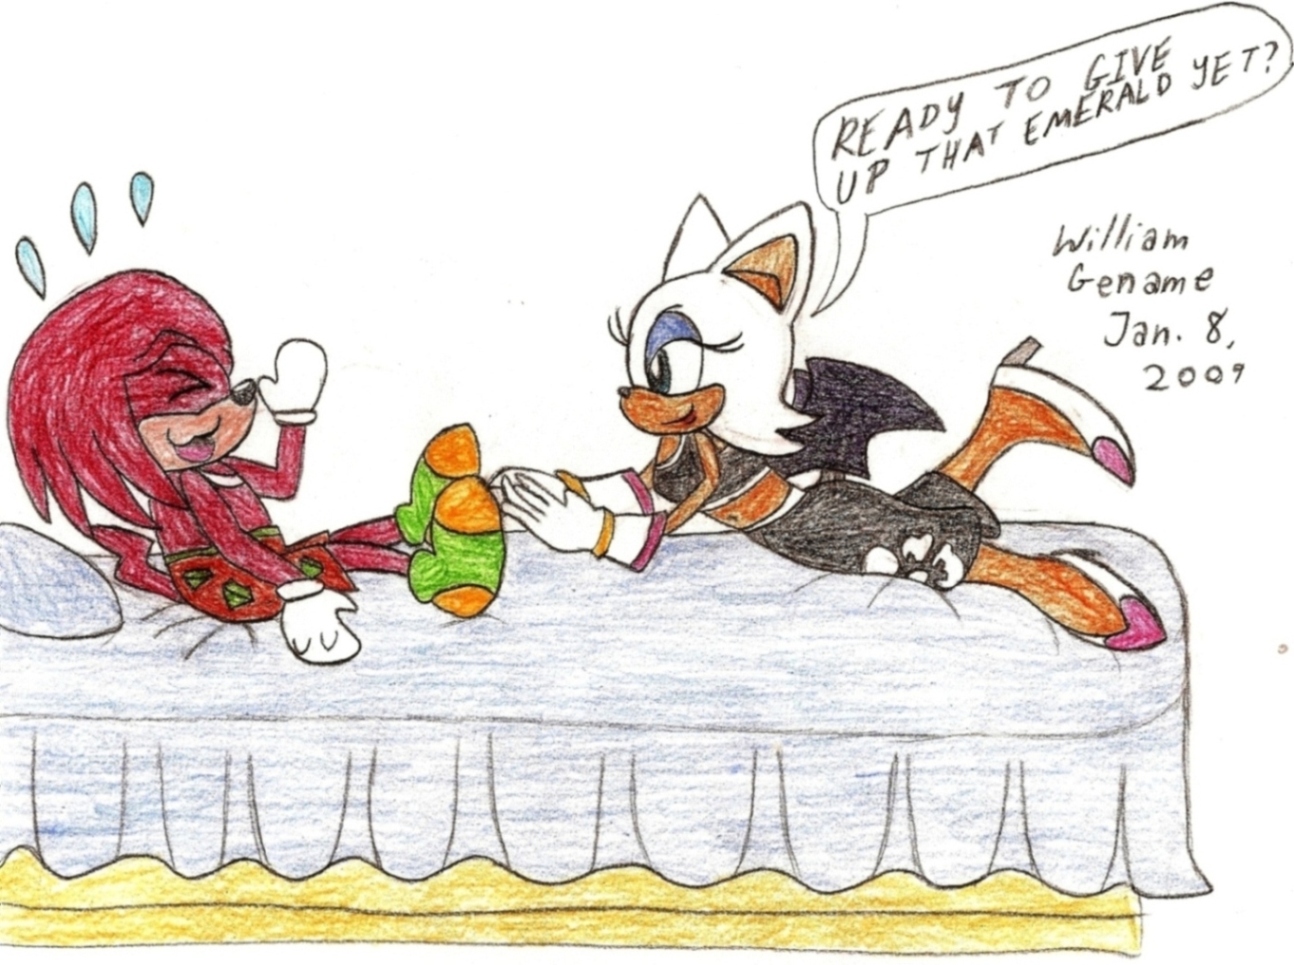 Rouge's Tickle Attack on Knux by germanname